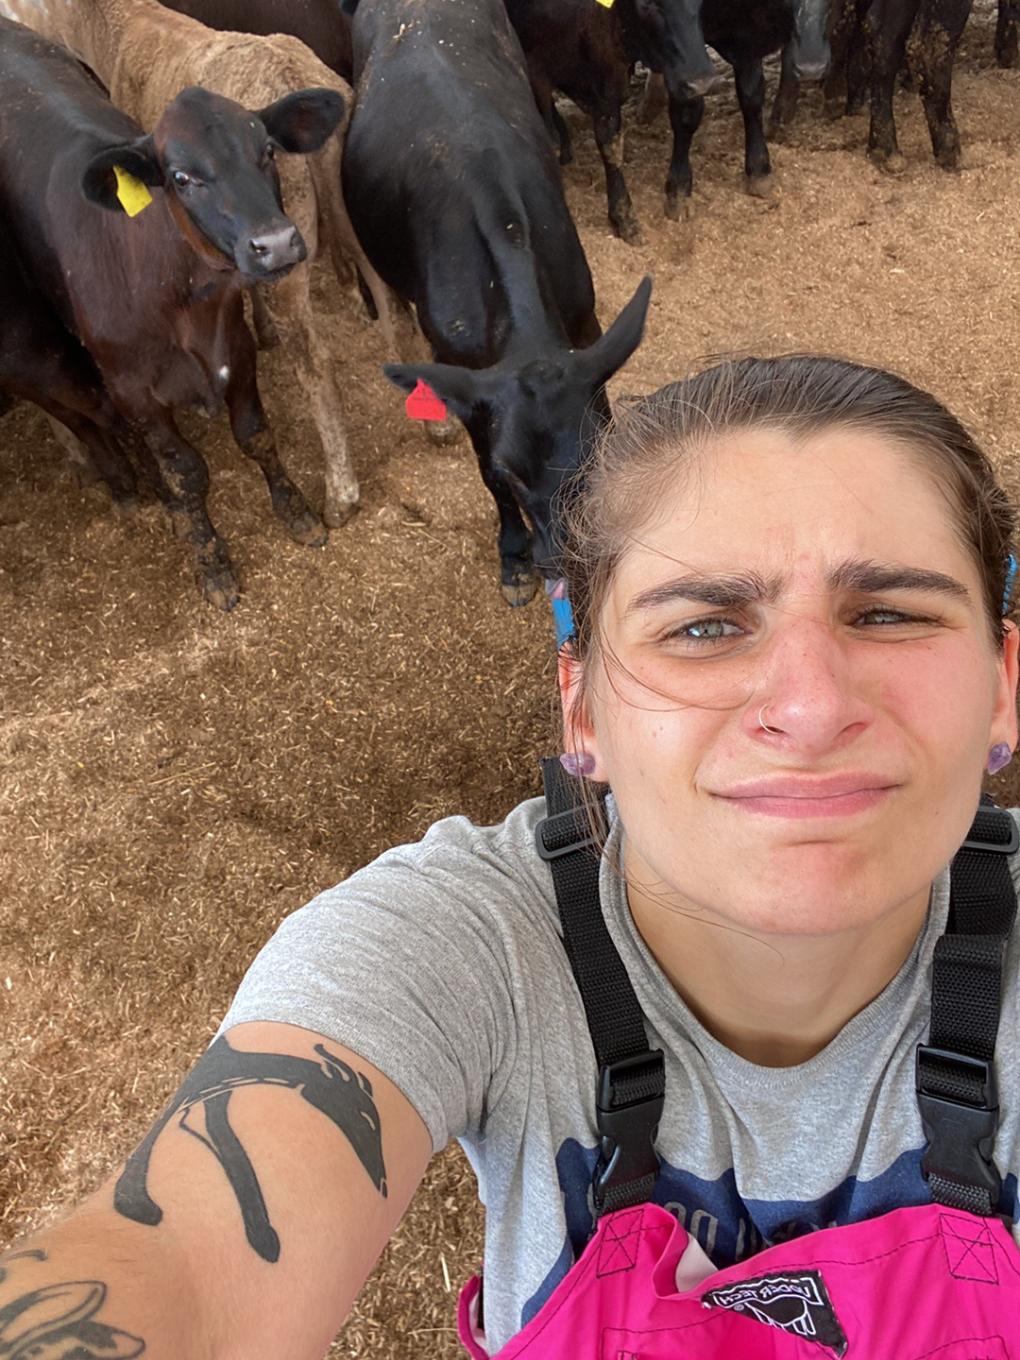 A person takes a selfie with cows in the background